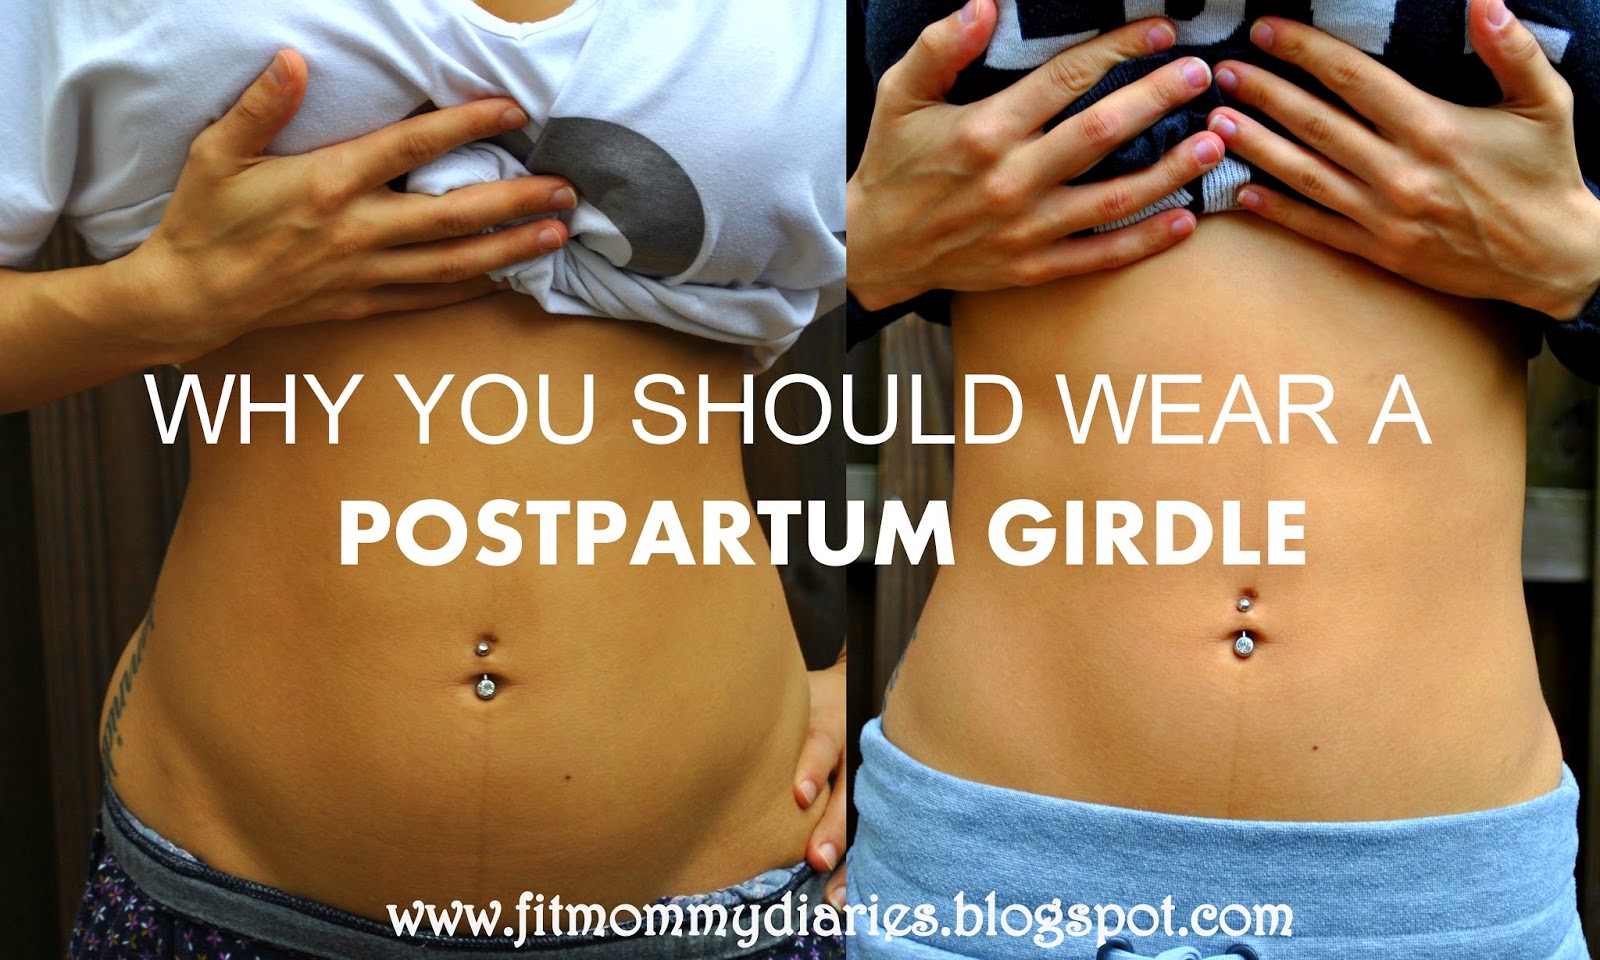 Why You Should Use a Postpartum Girdle After Delivery - Diary of a Fit Mommy